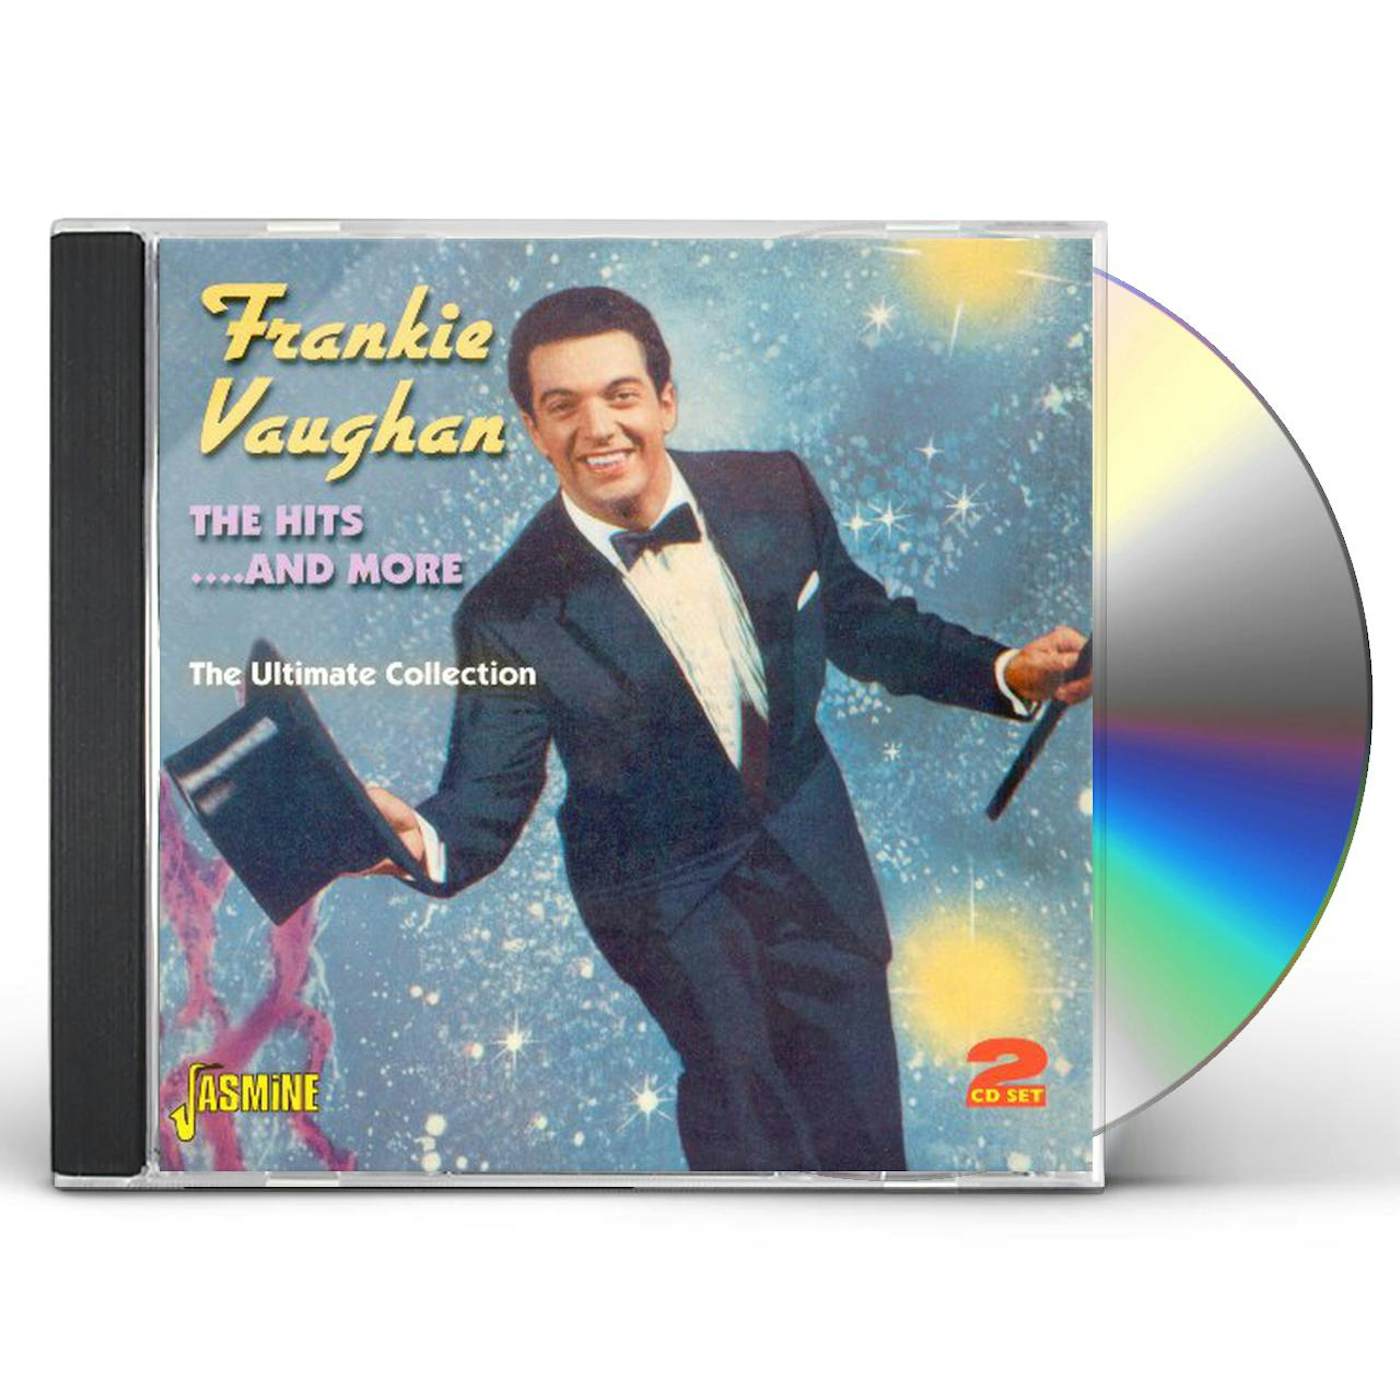 Frankie Vaughan ULTIMATE COLLECTION CD